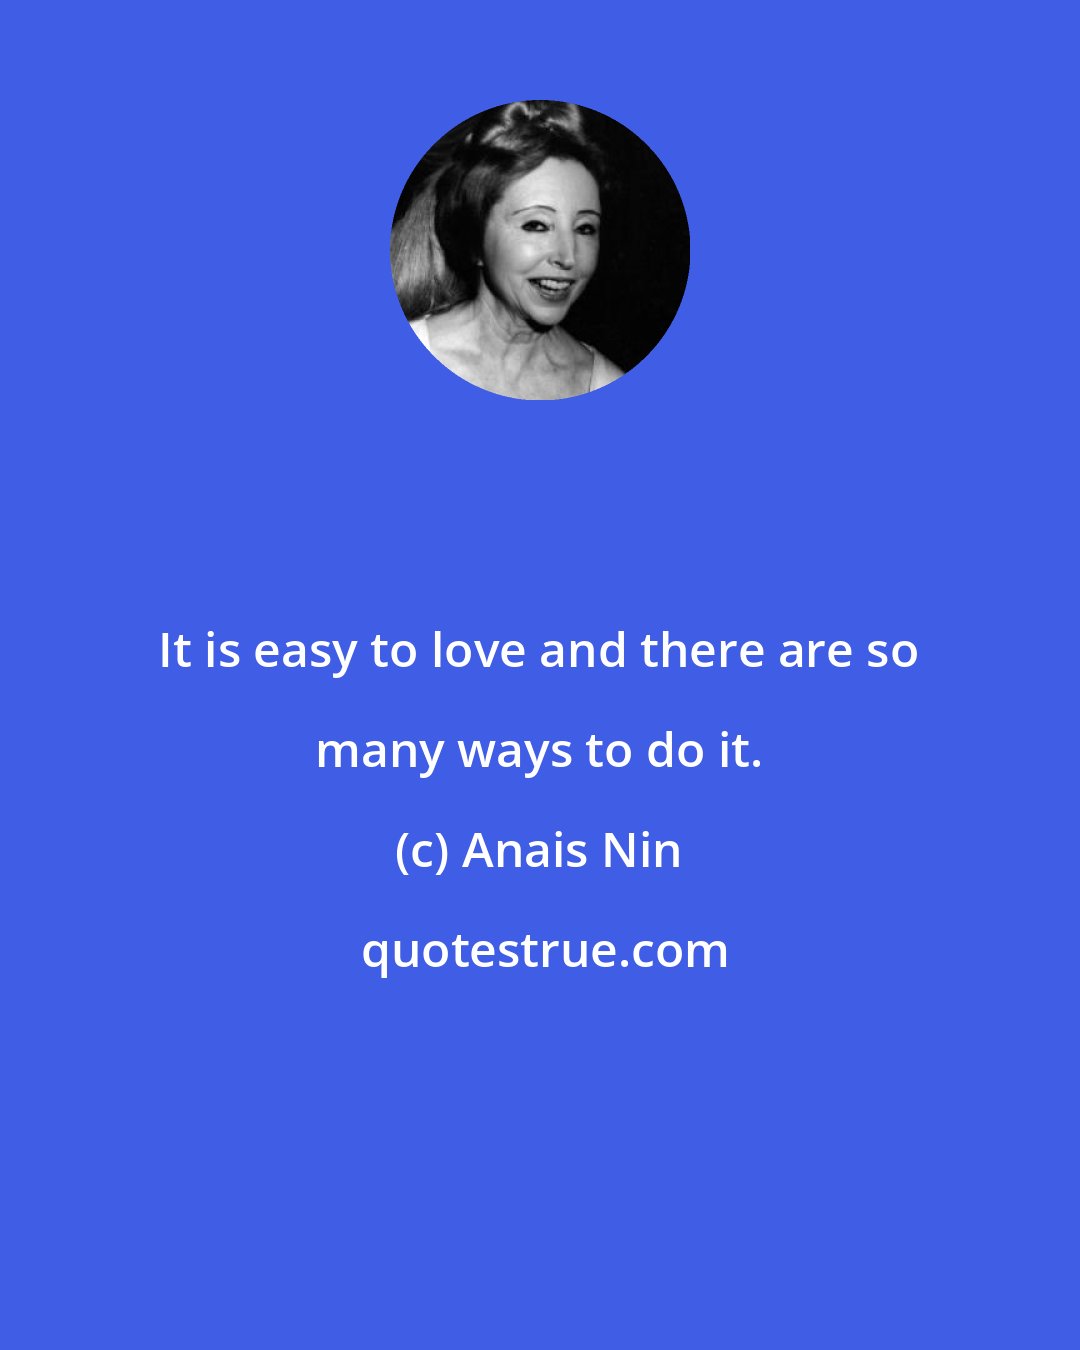 Anais Nin: It is easy to love and there are so many ways to do it.